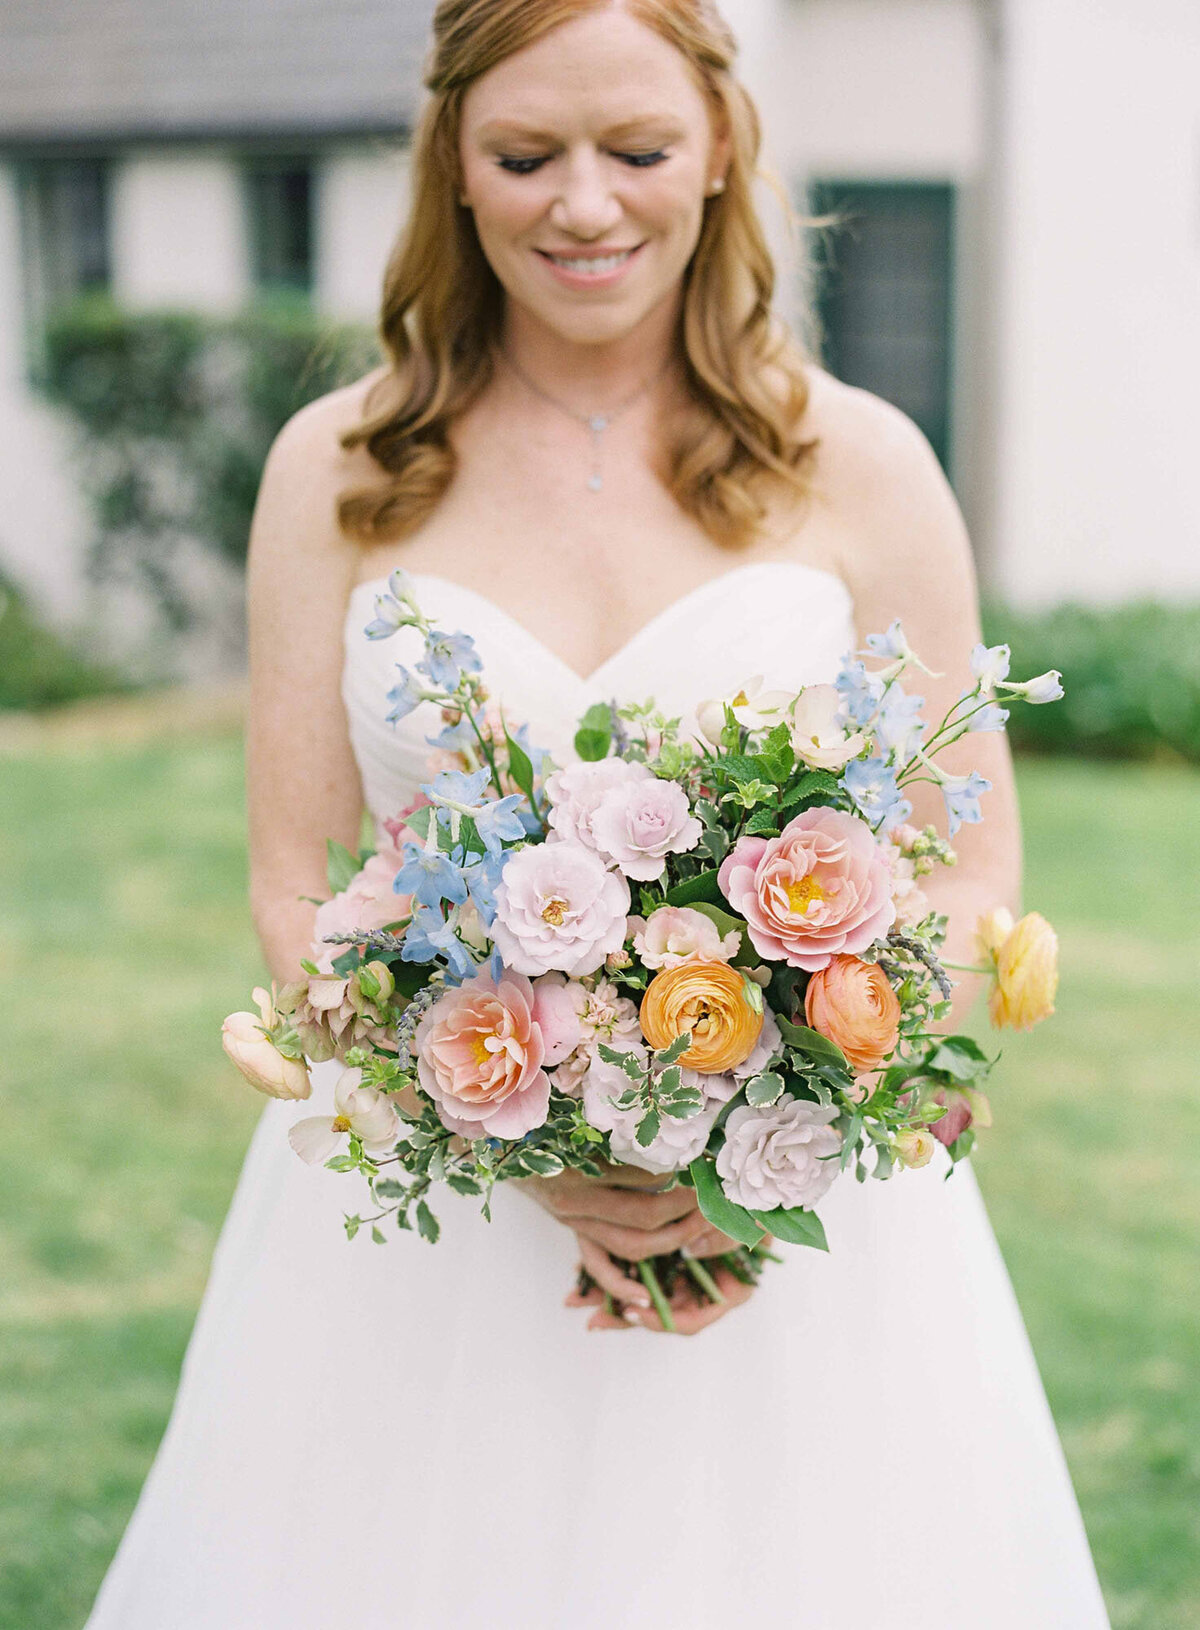 8santa-barbara-estate-wedding-planner-bridal-bouquet-pastel-flowers-pink-yellow-white-blue-coral-soft-colors-muted-tones